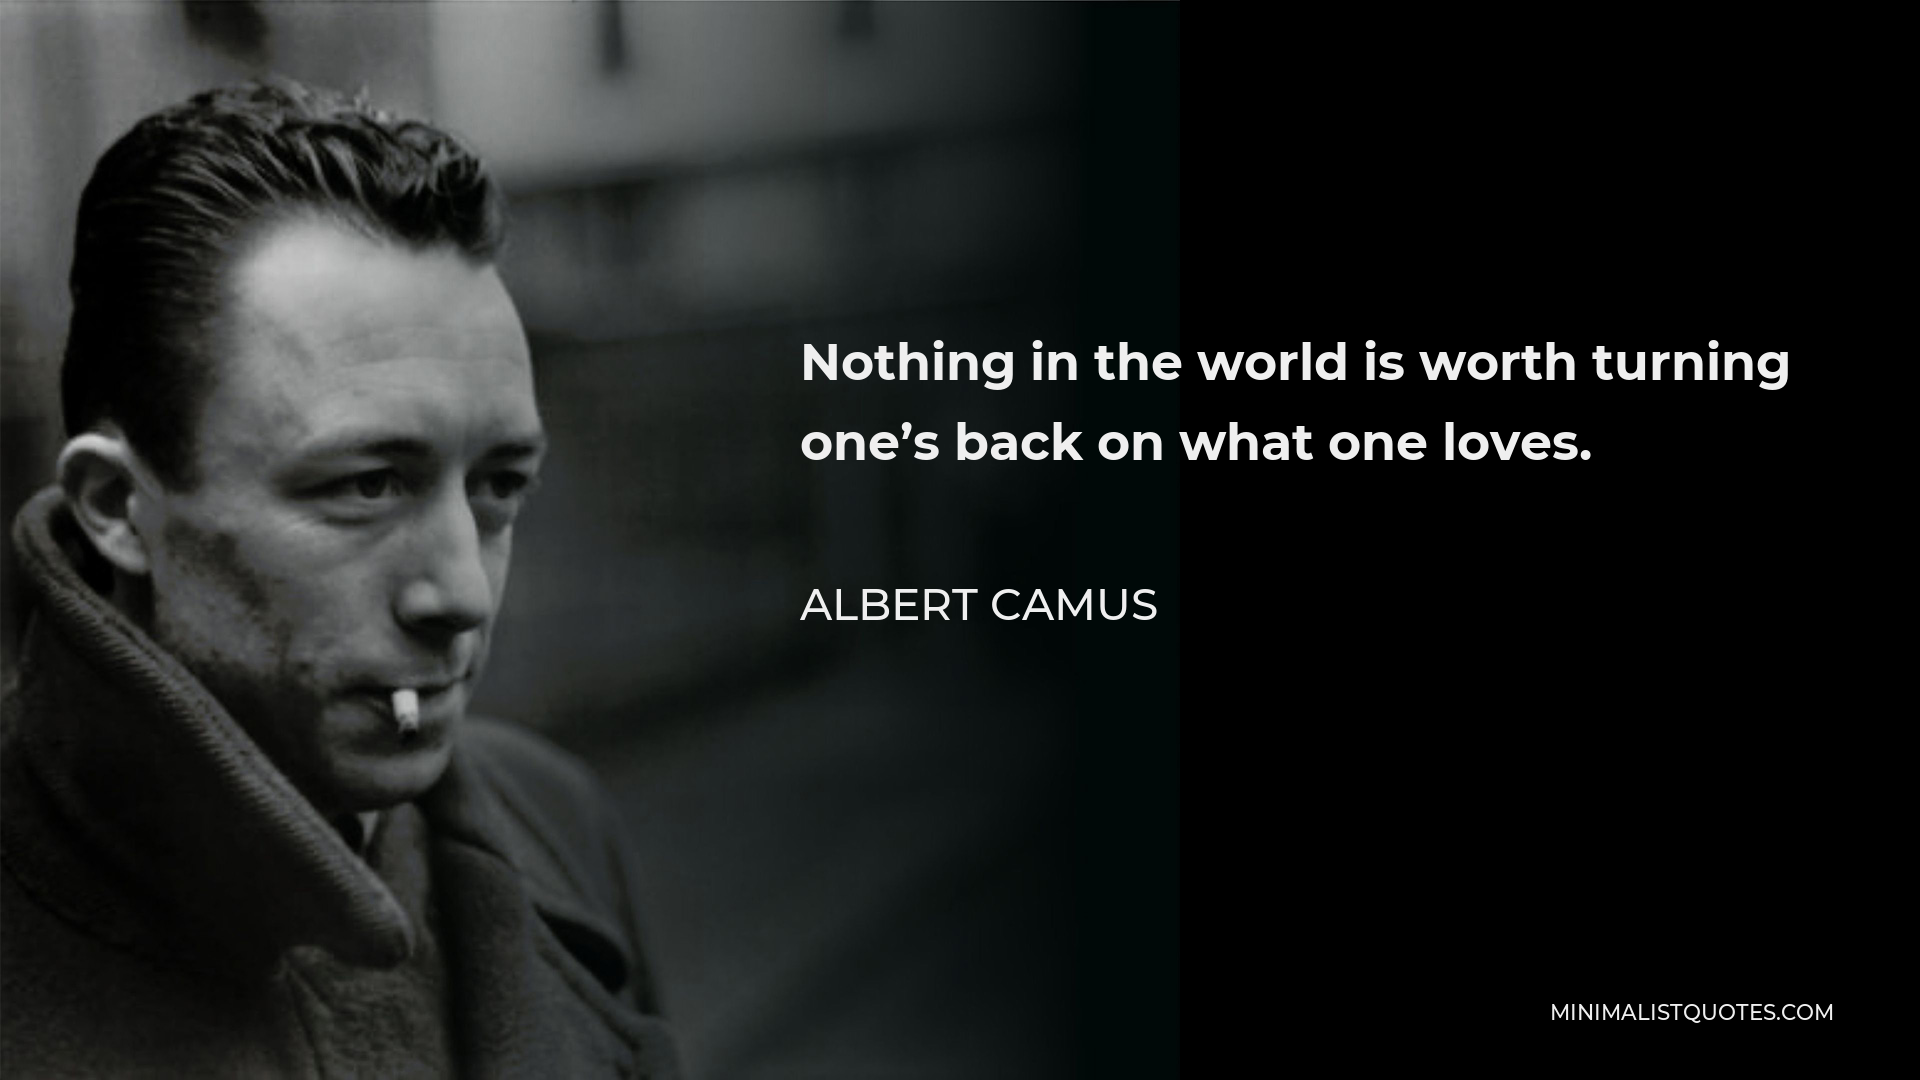 Albert Camus Quote - Nothing in the world is worth turning one’s back on what one loves.